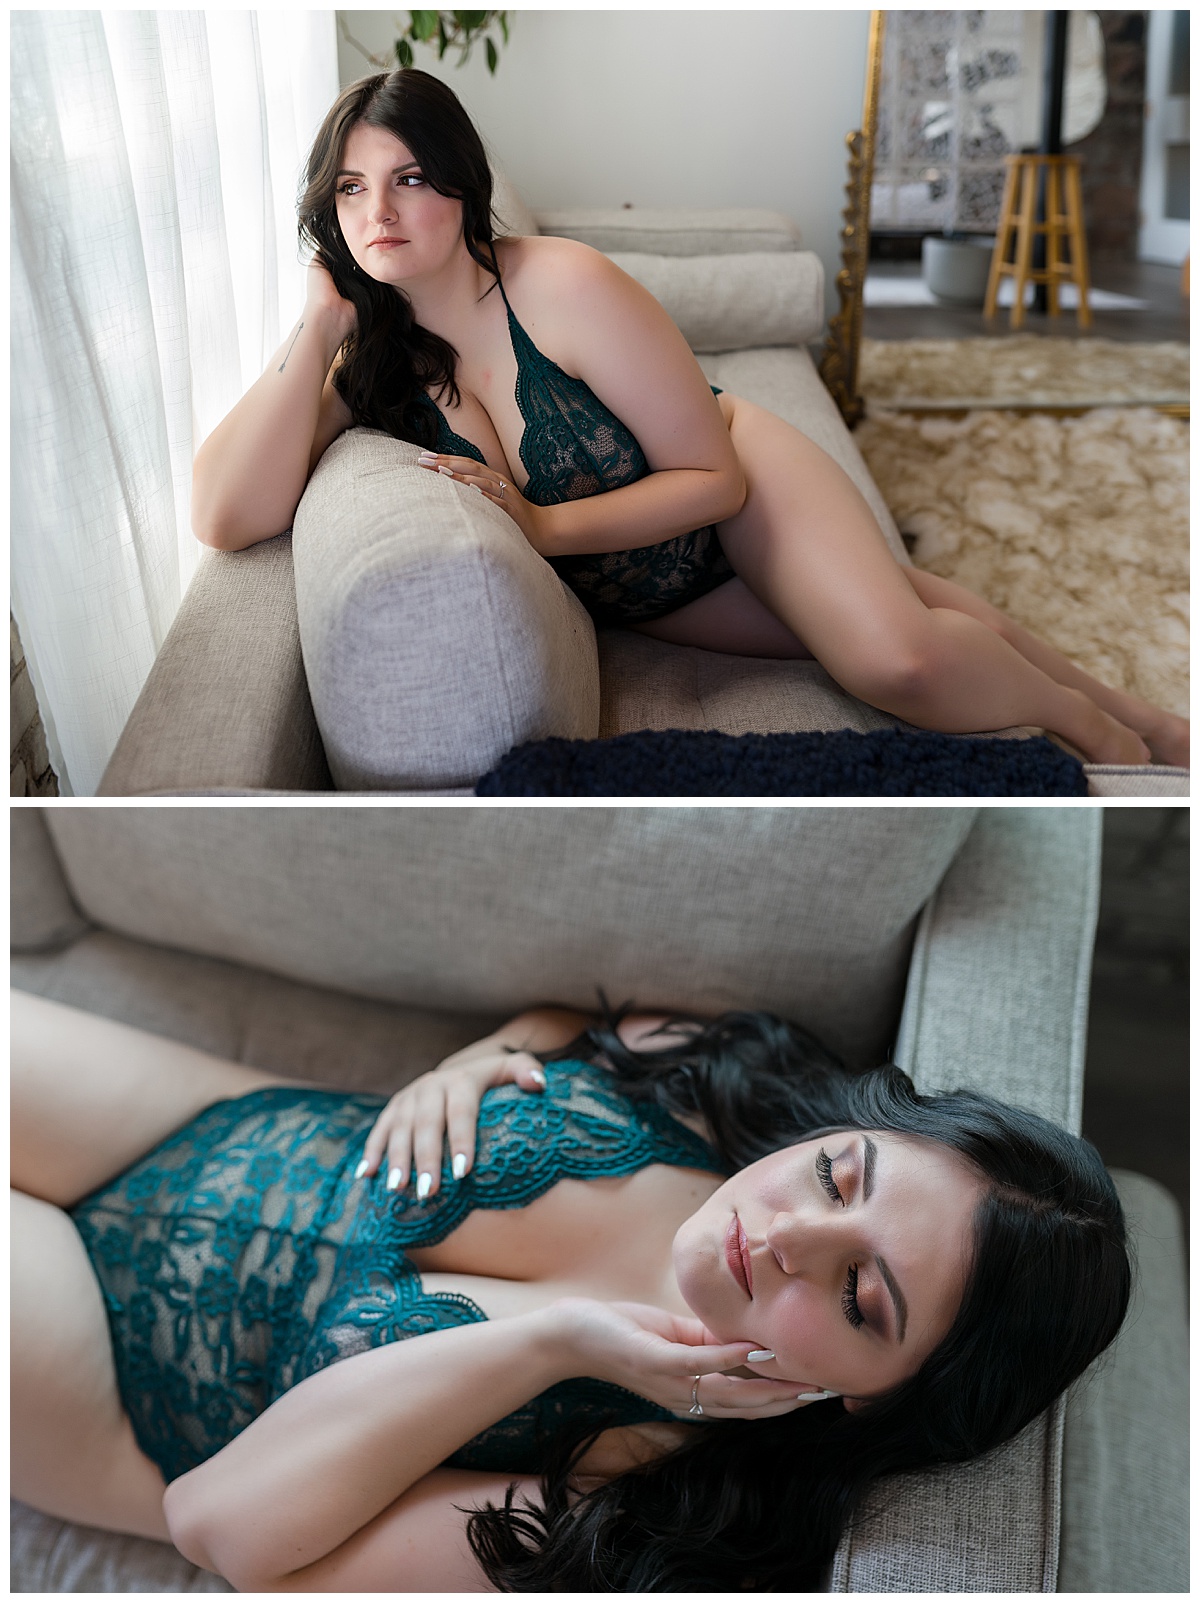 Looking out window, woman is in teal lingerie for South Dakota Boudoir Photographer